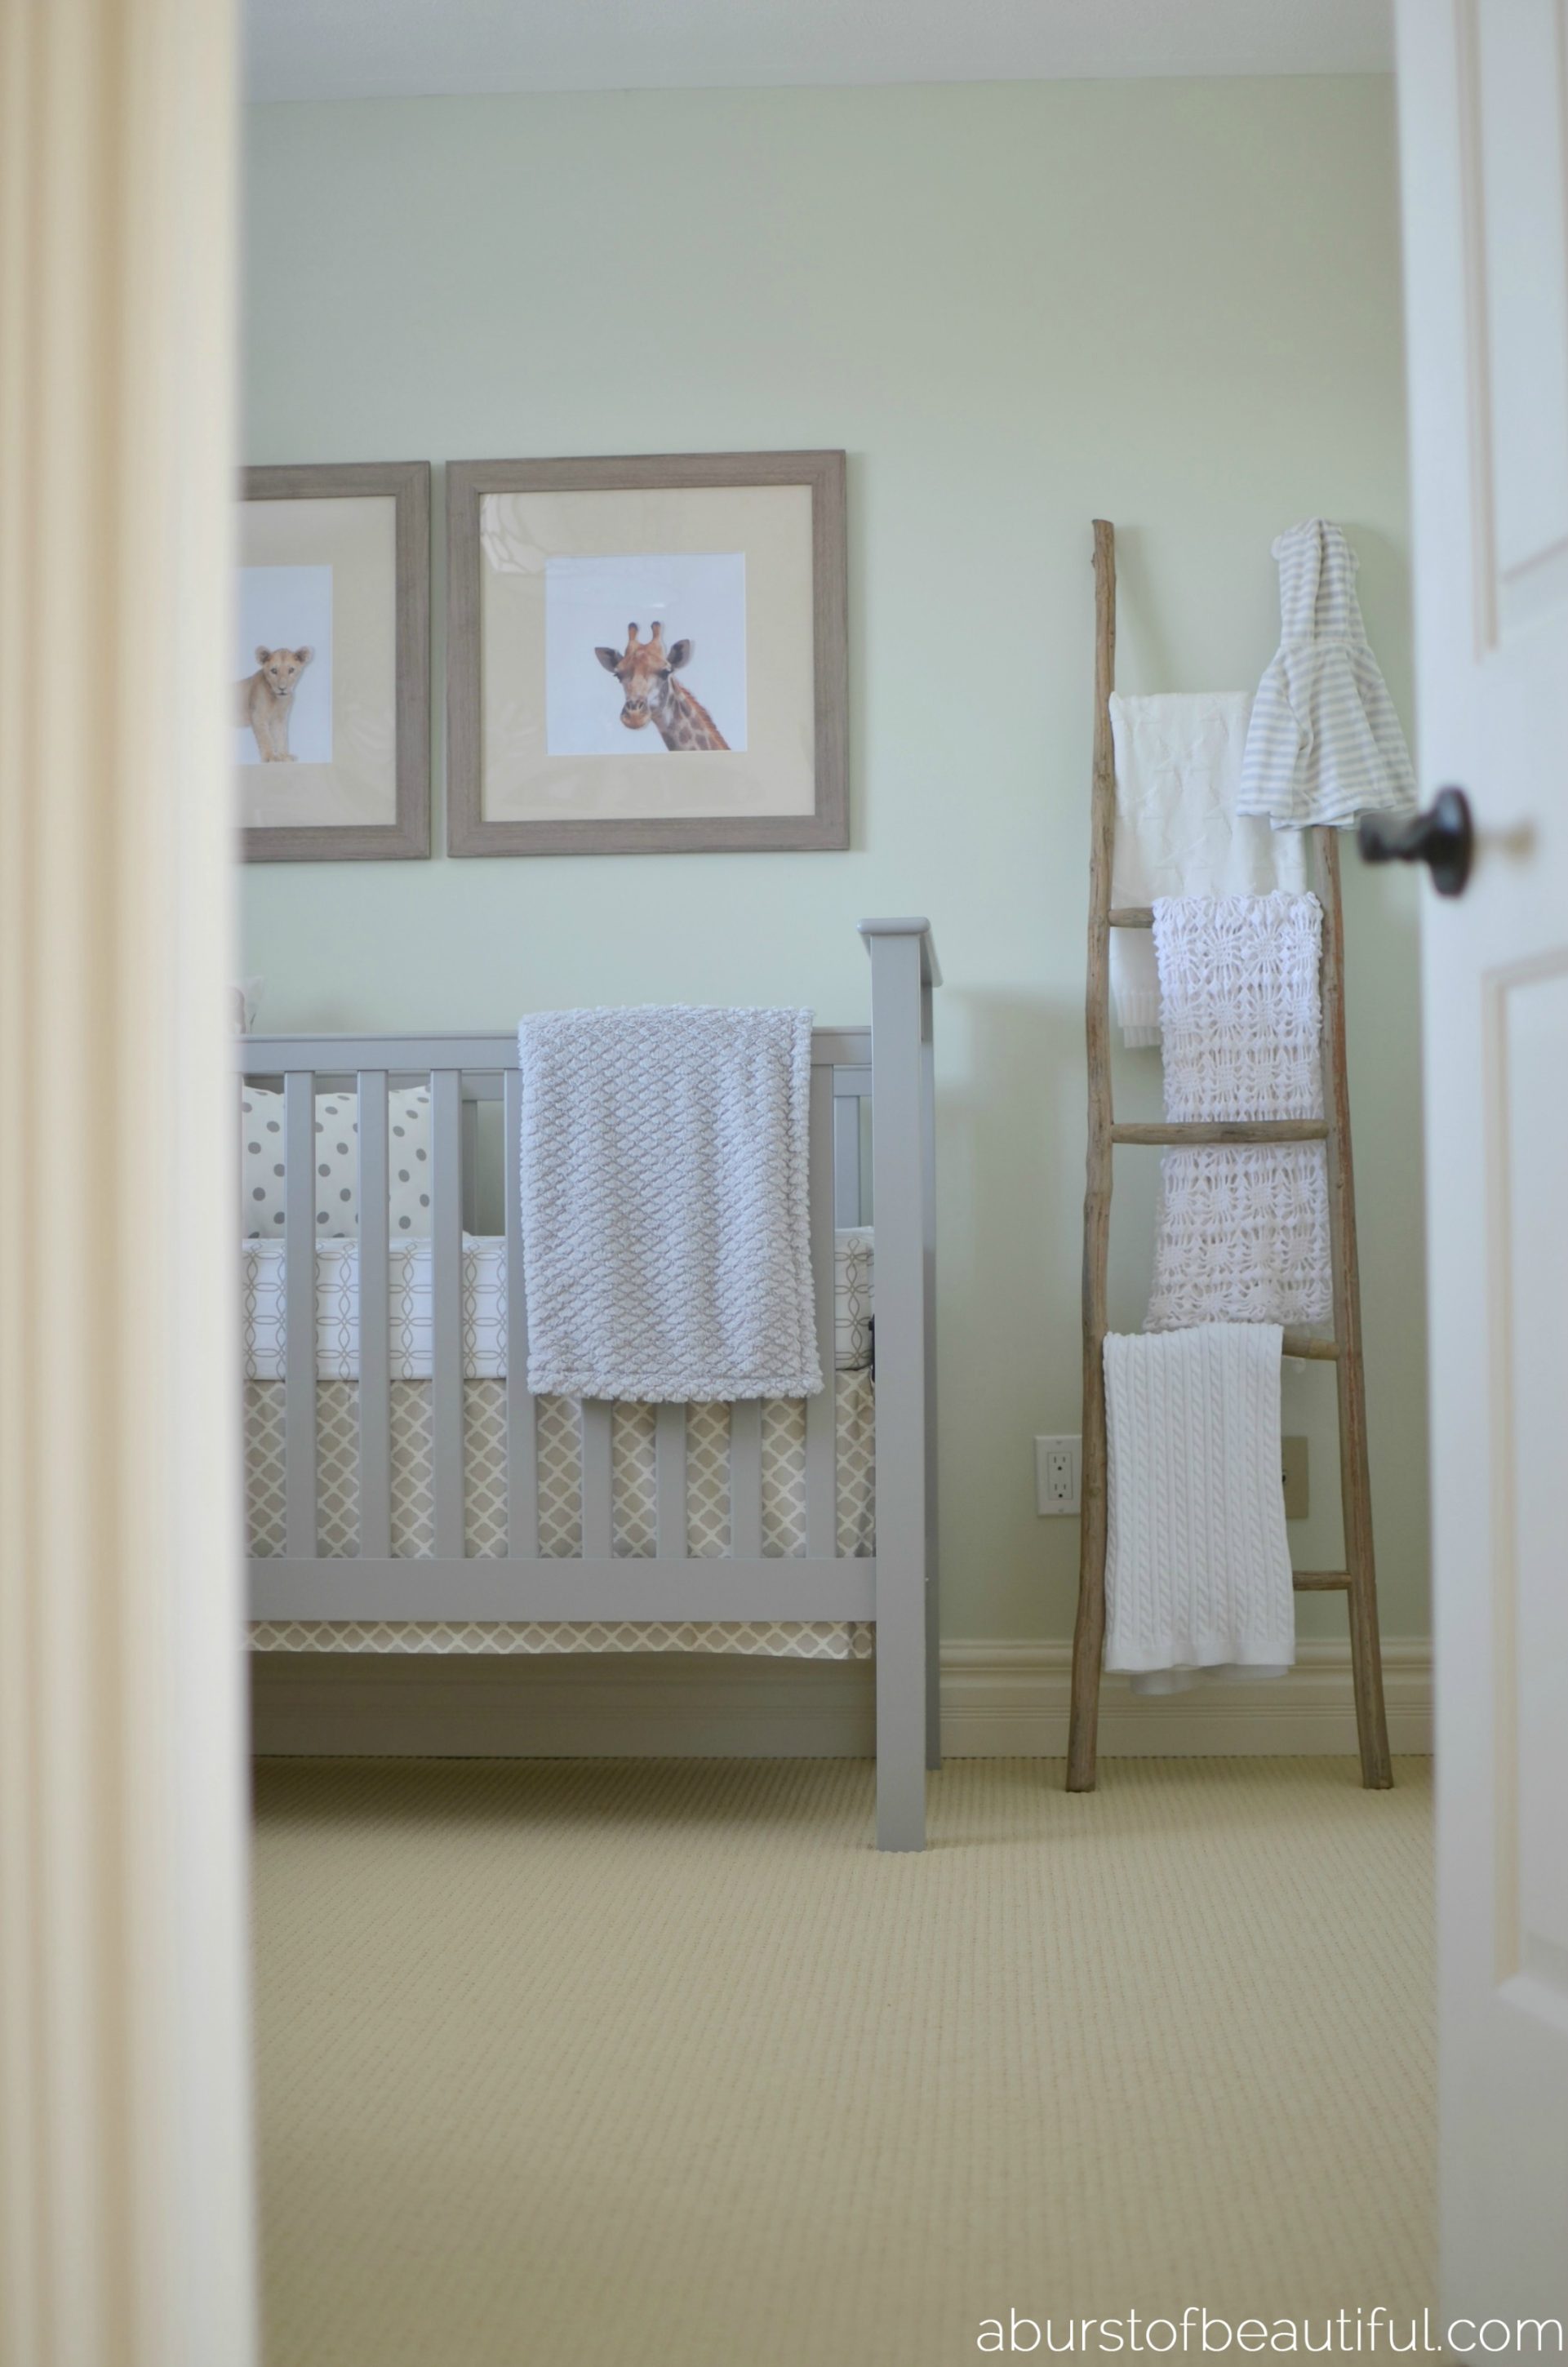 A soft and soothing gender neutral nursery | A Burst of Beautiful